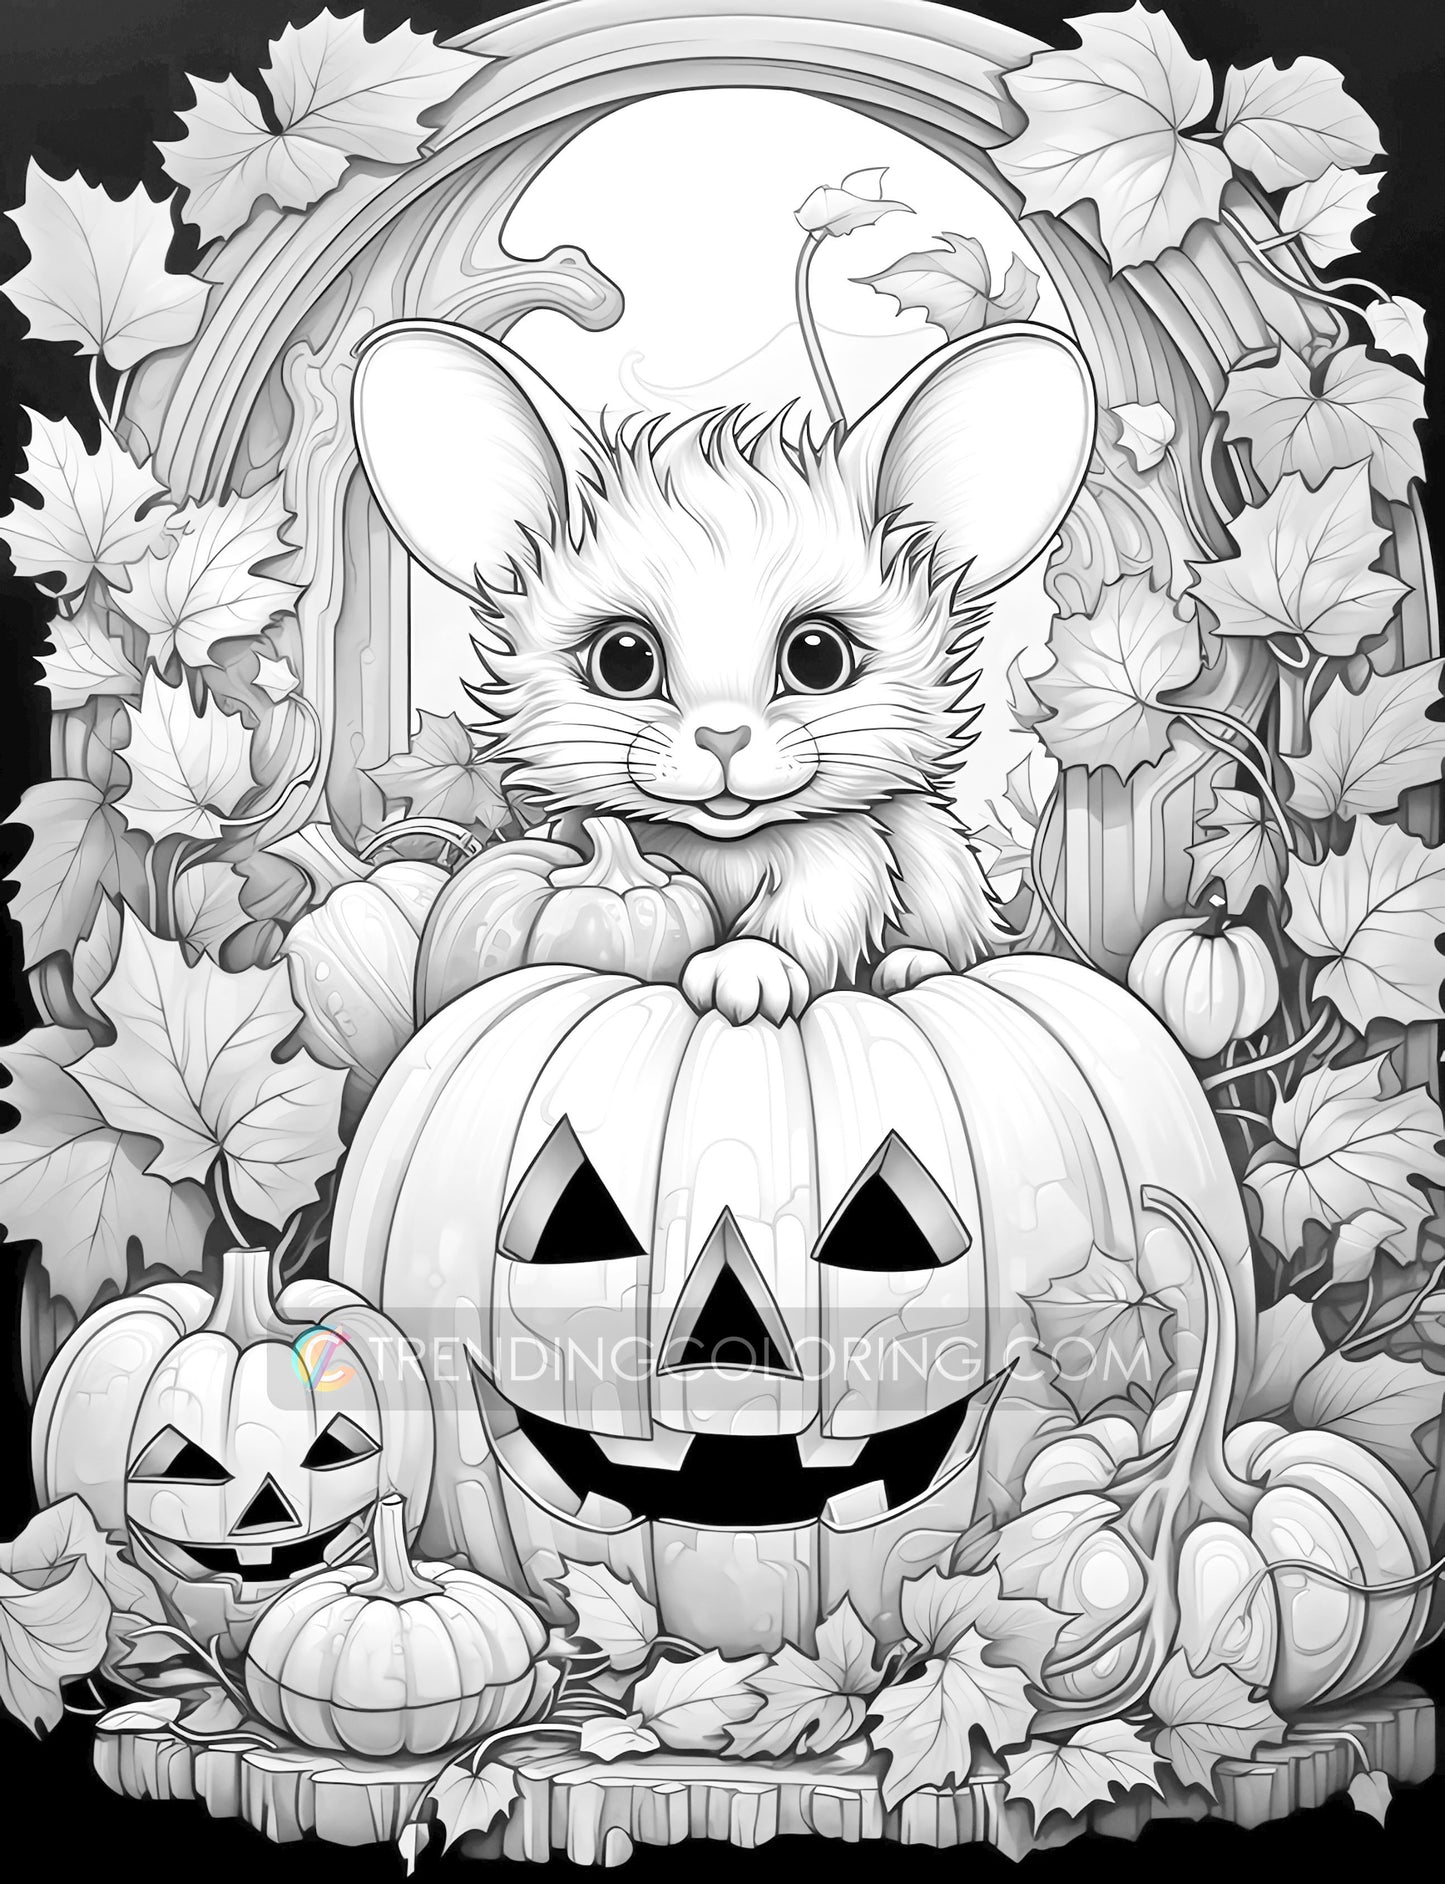 Autumn Animal Grayscale Coloring Page